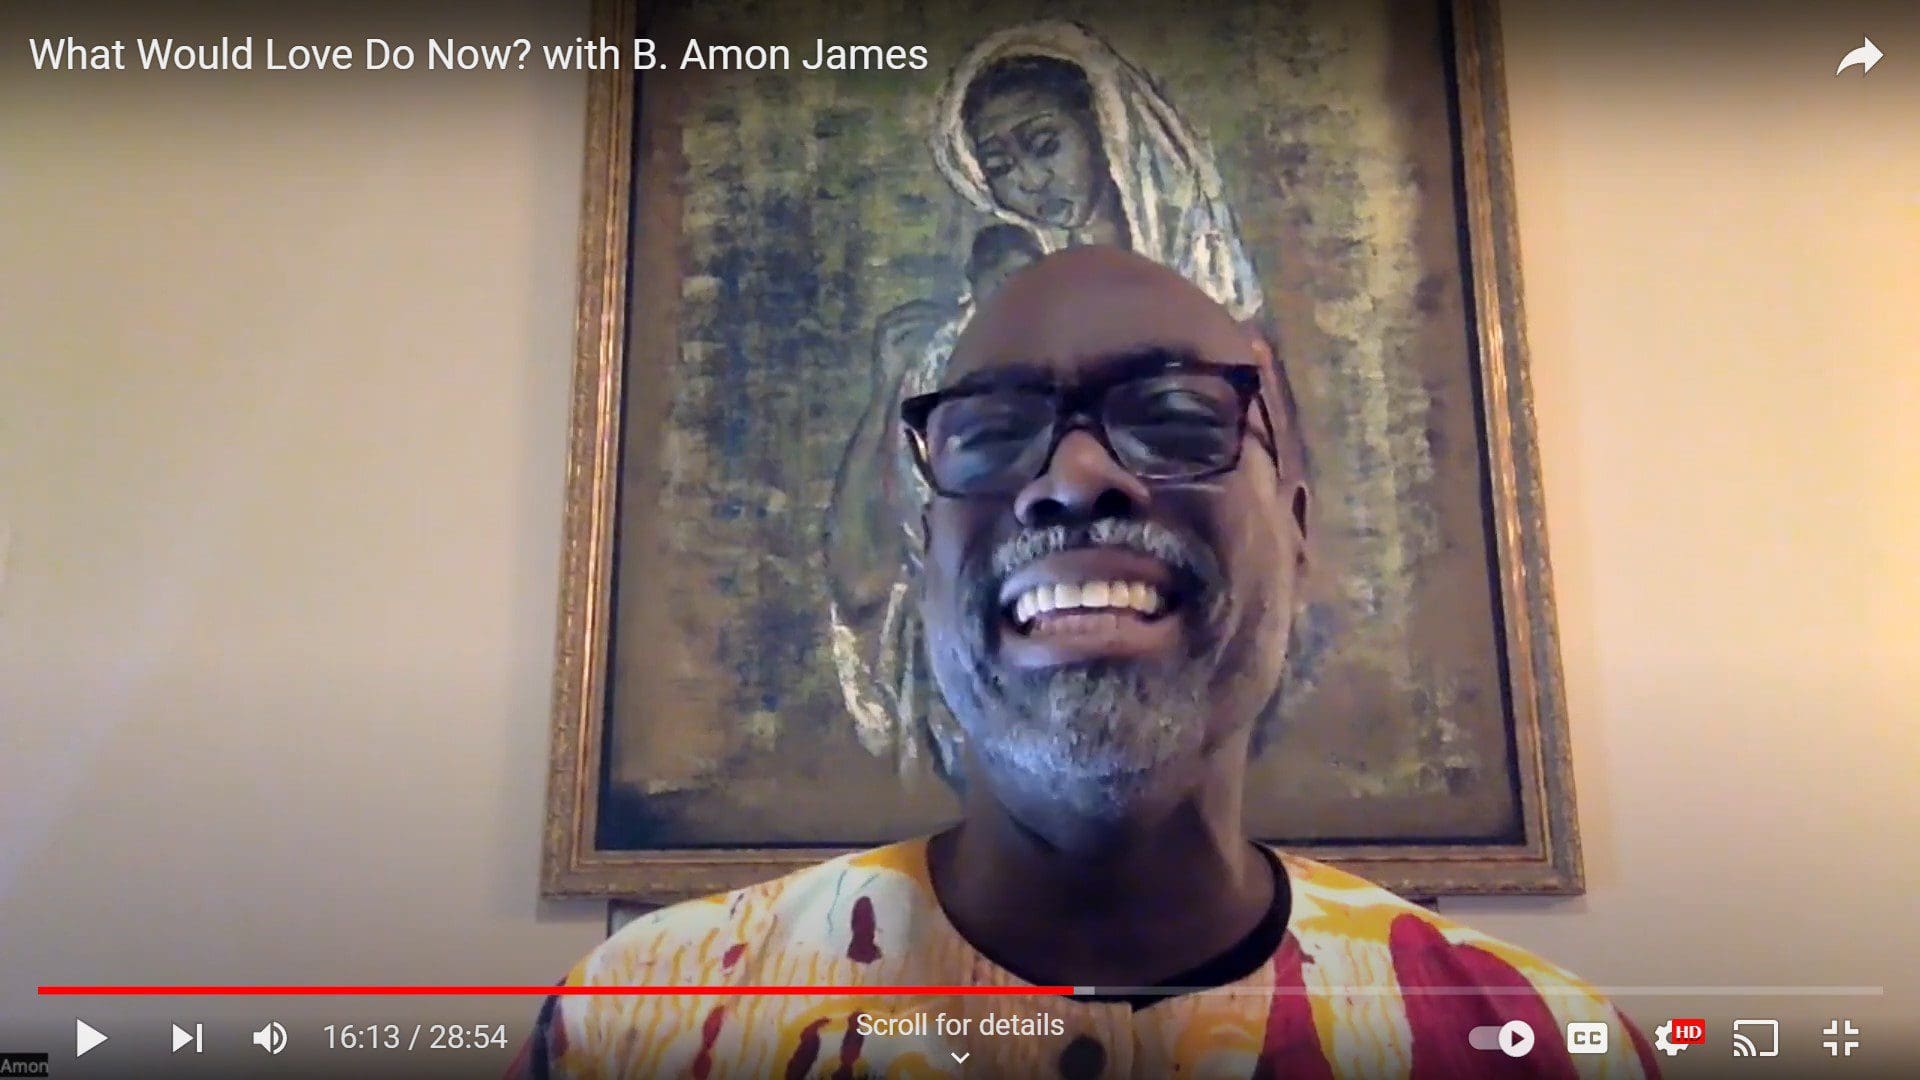 "What Would Love Do Now?" – B. Amon James